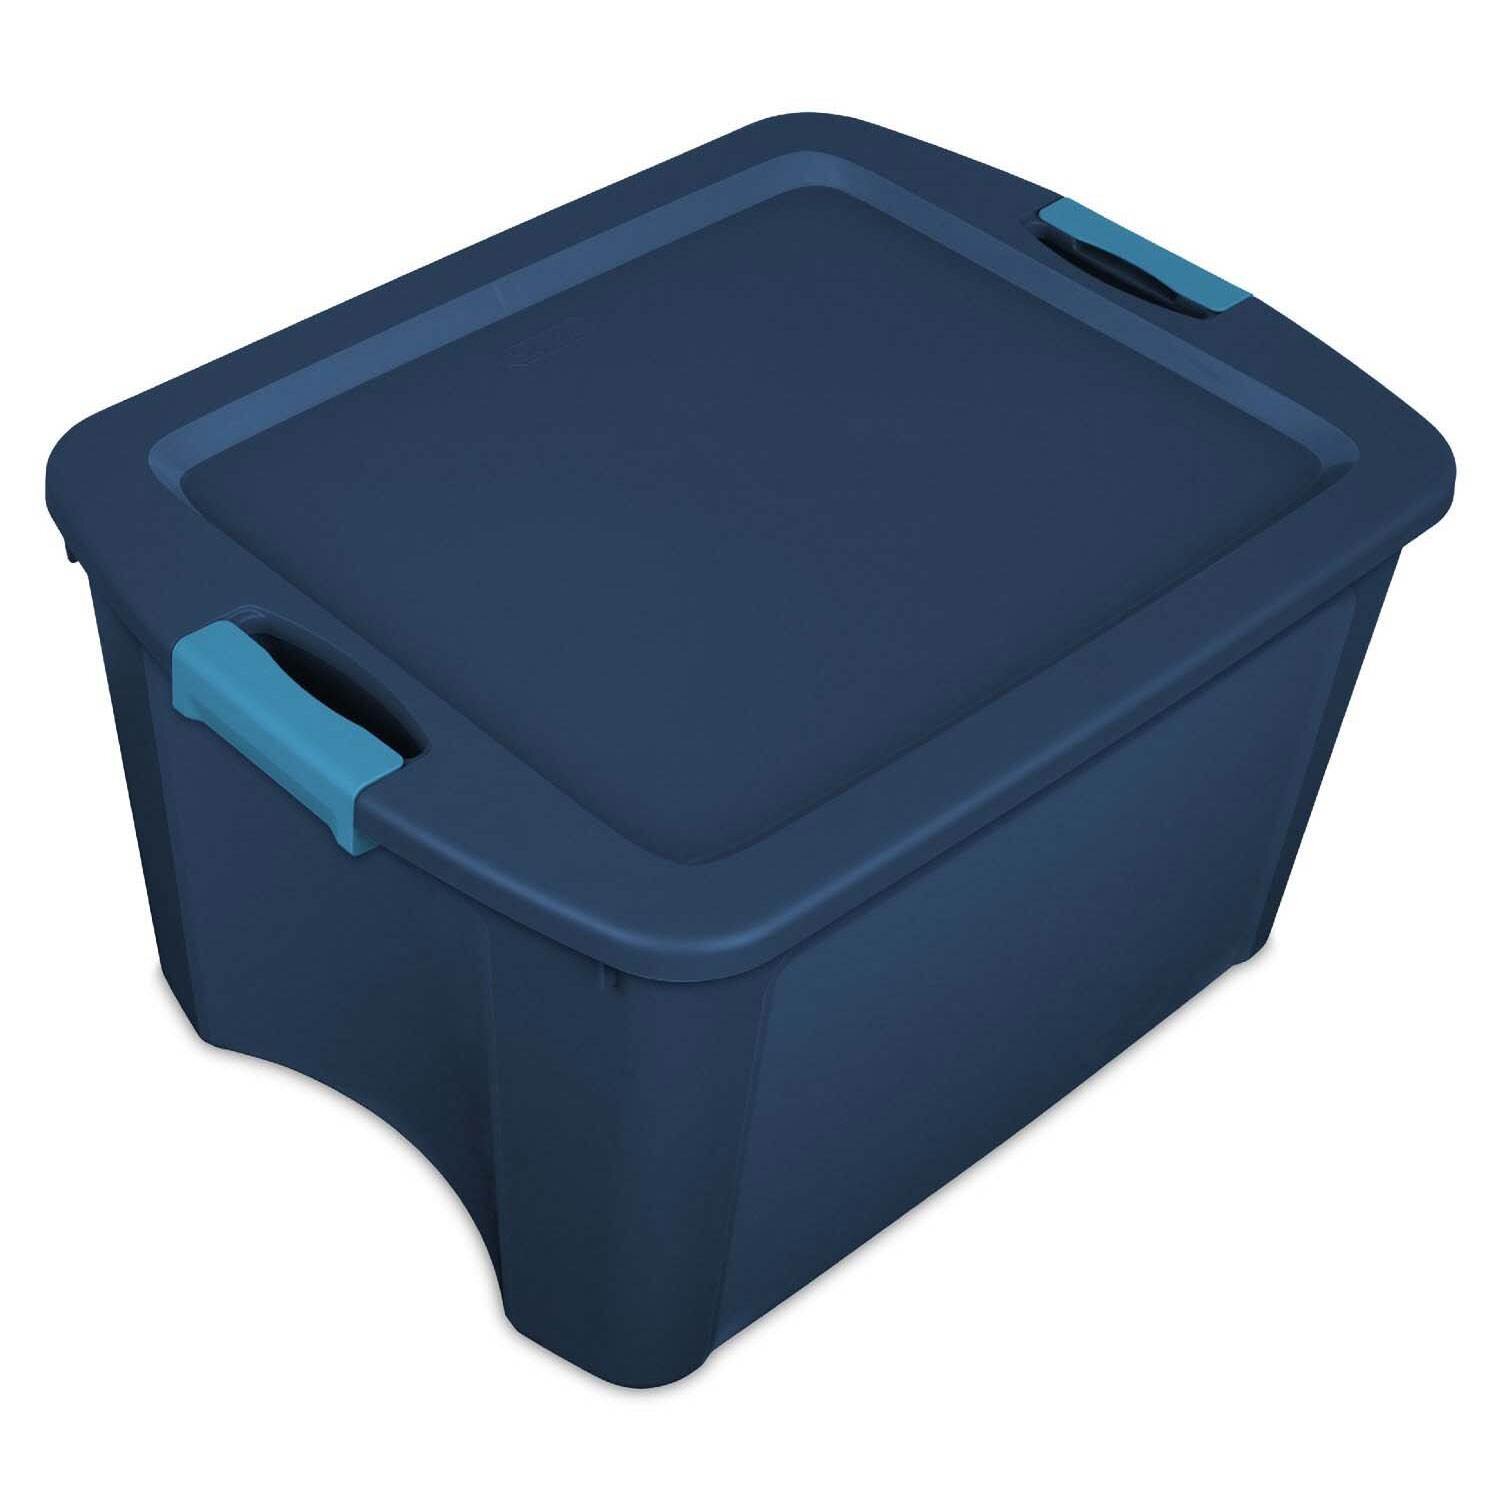 Sterilite 18 Gal Latching Tuff1 Storage Tote, Stackable Bin with Latch Lid,  Plastic Container to Organize Garage, Basement, Blue Base and Lid, 6-Pack